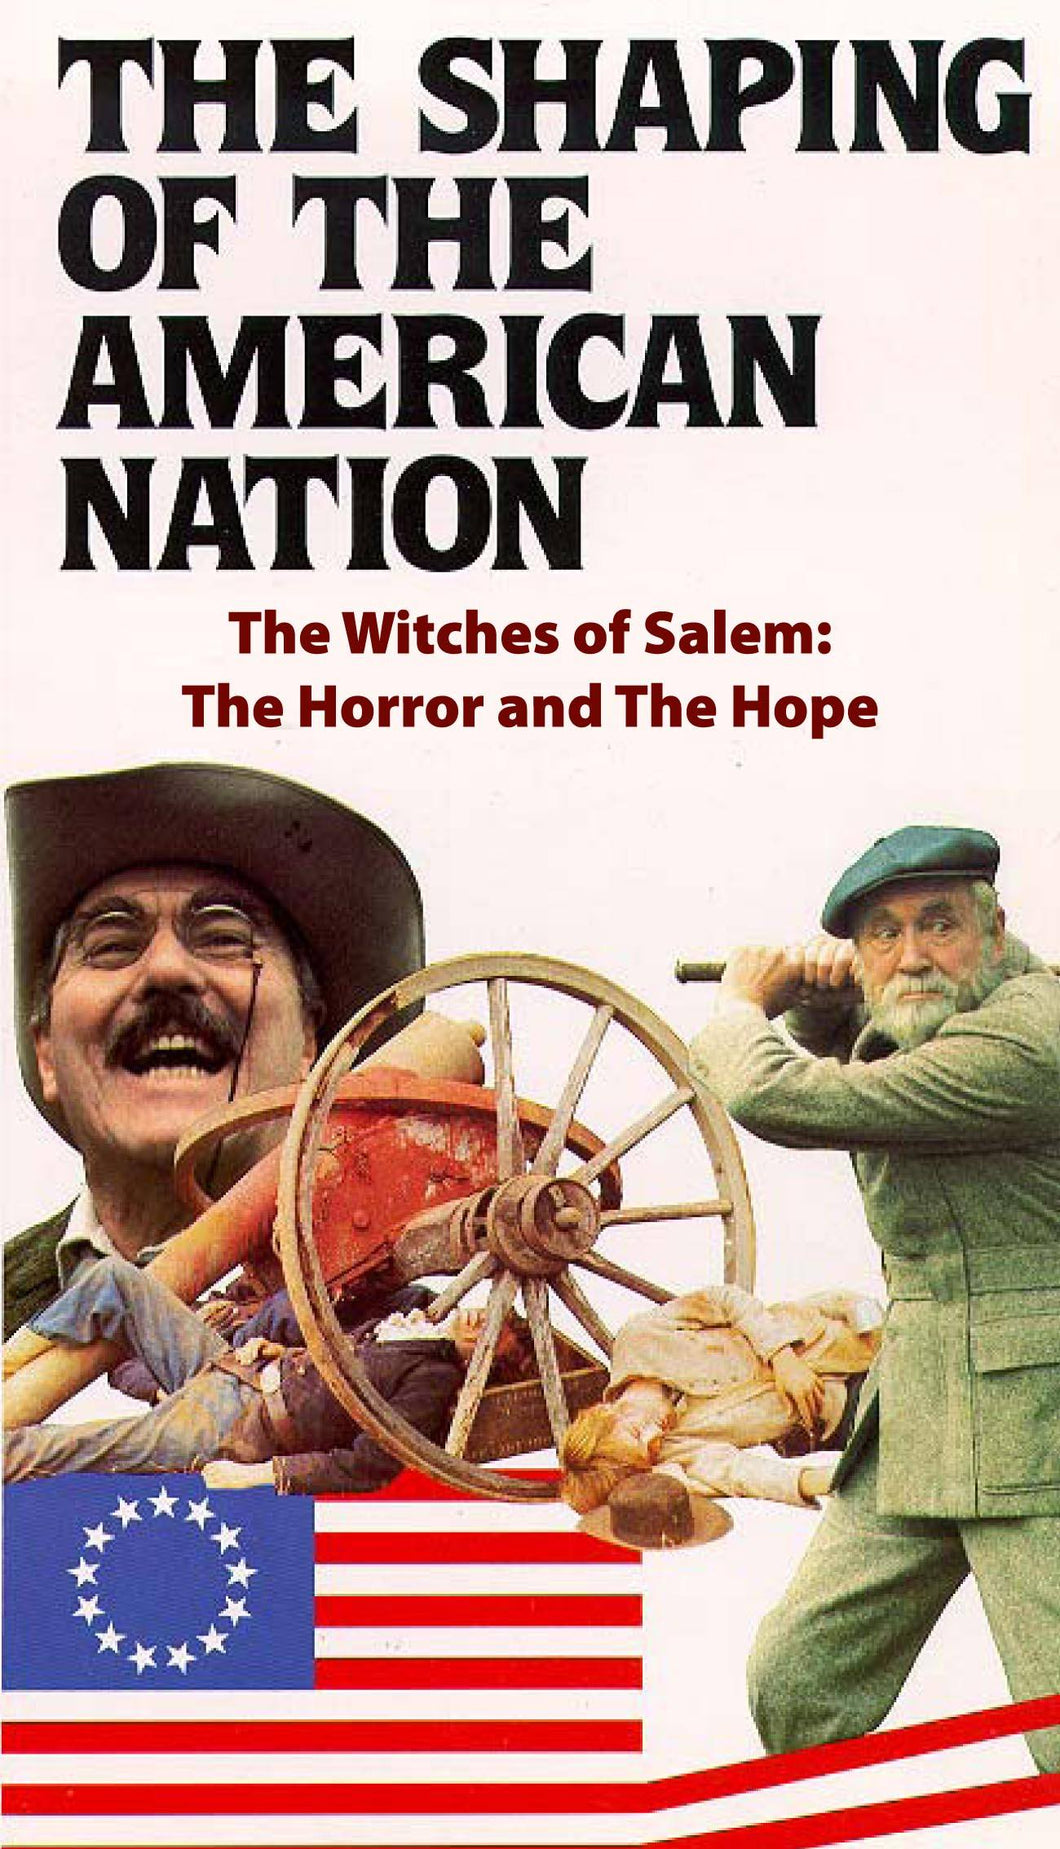 Witches of Salem: The Horror and the Hope